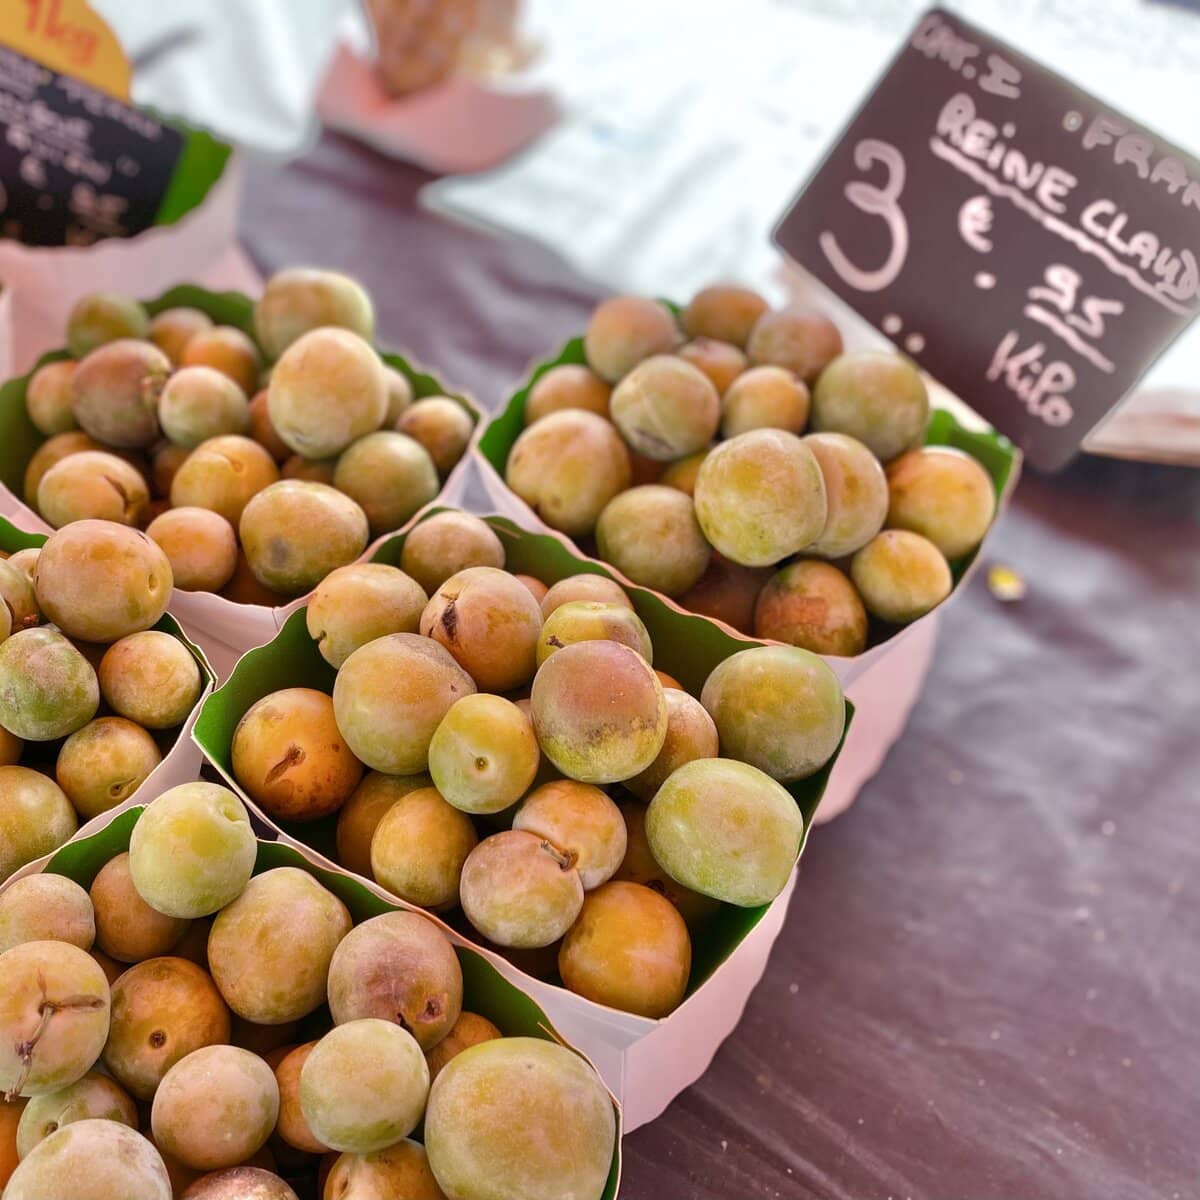 boxes of greengages at the french market